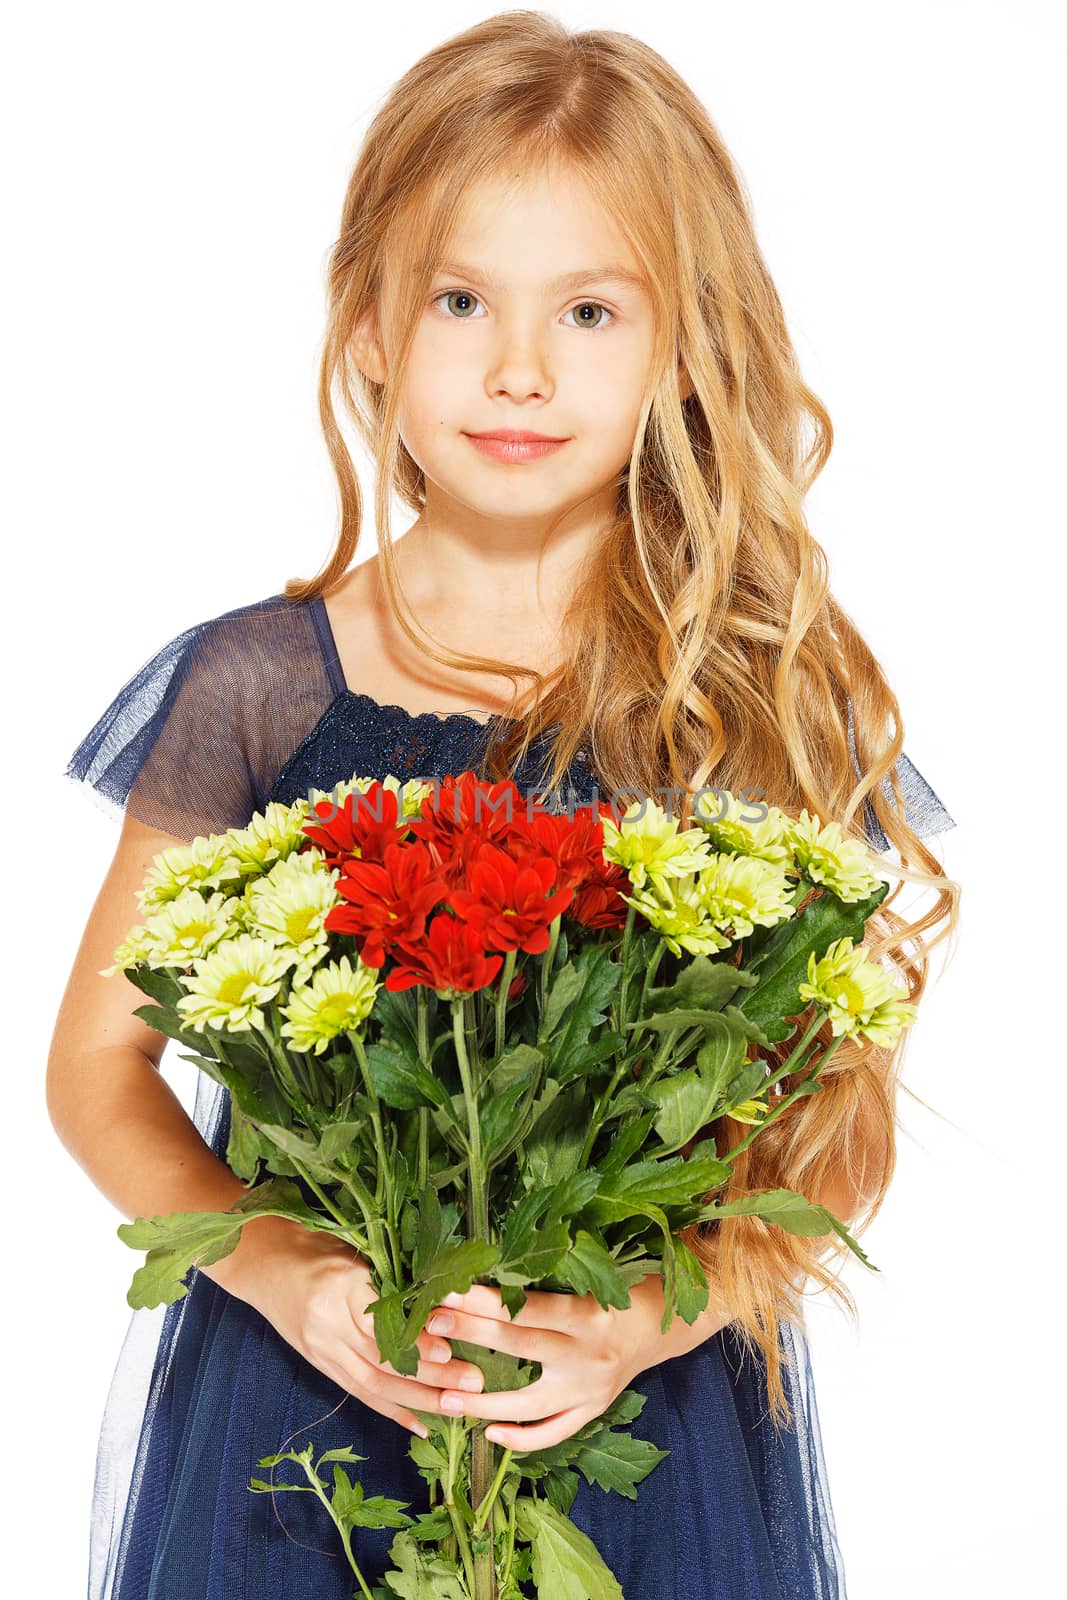 Charming little girl with curly hair in a blue dress with a bouquet of flowers